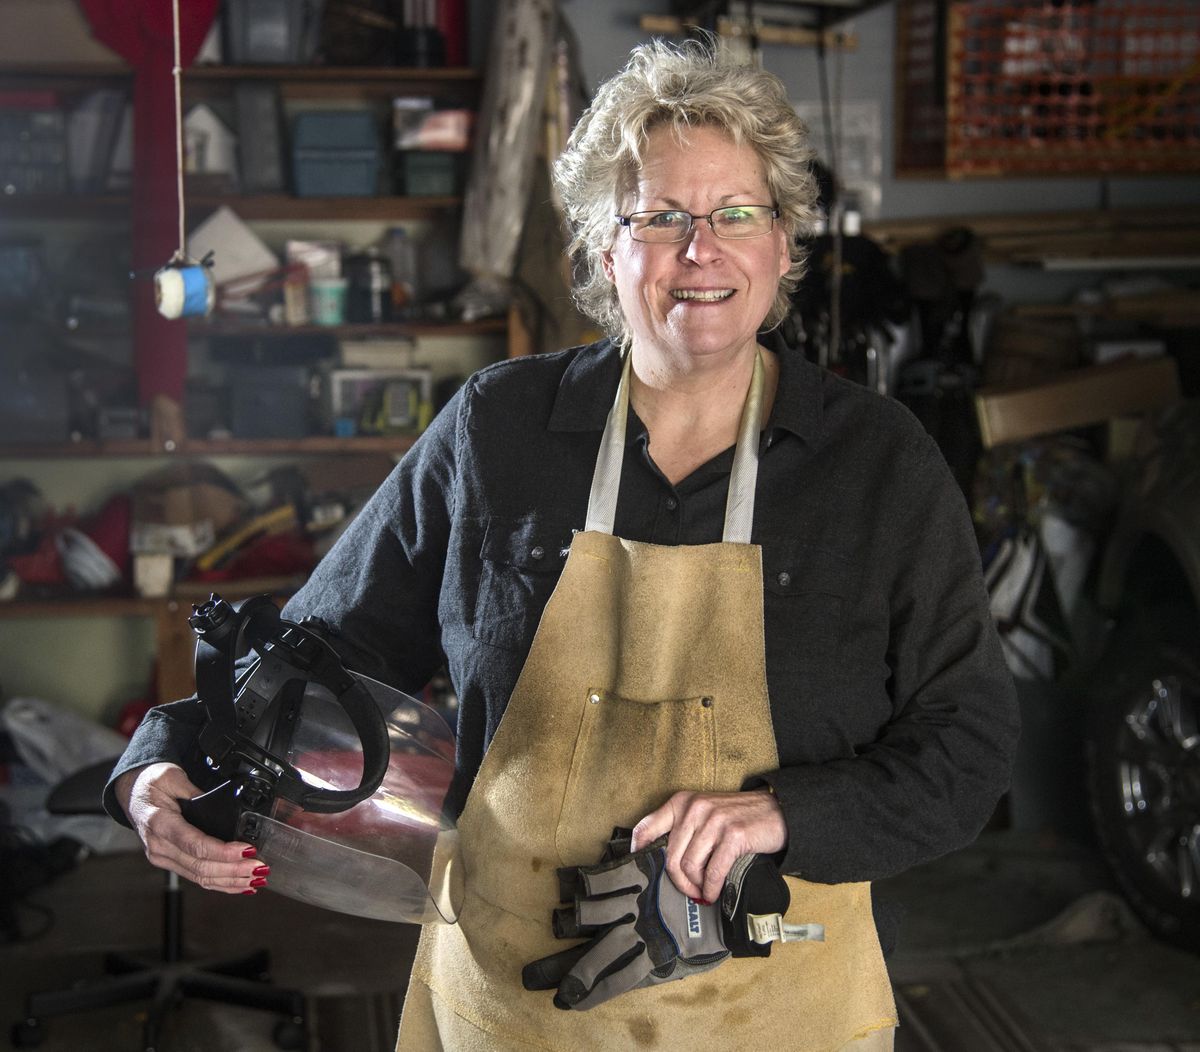 Terry Rathbun, of Roots of Silver, crafts antique silverware into pieces of jewelry she sells or does at the request of families. (Dan Pelle / The Spokesman-Review)